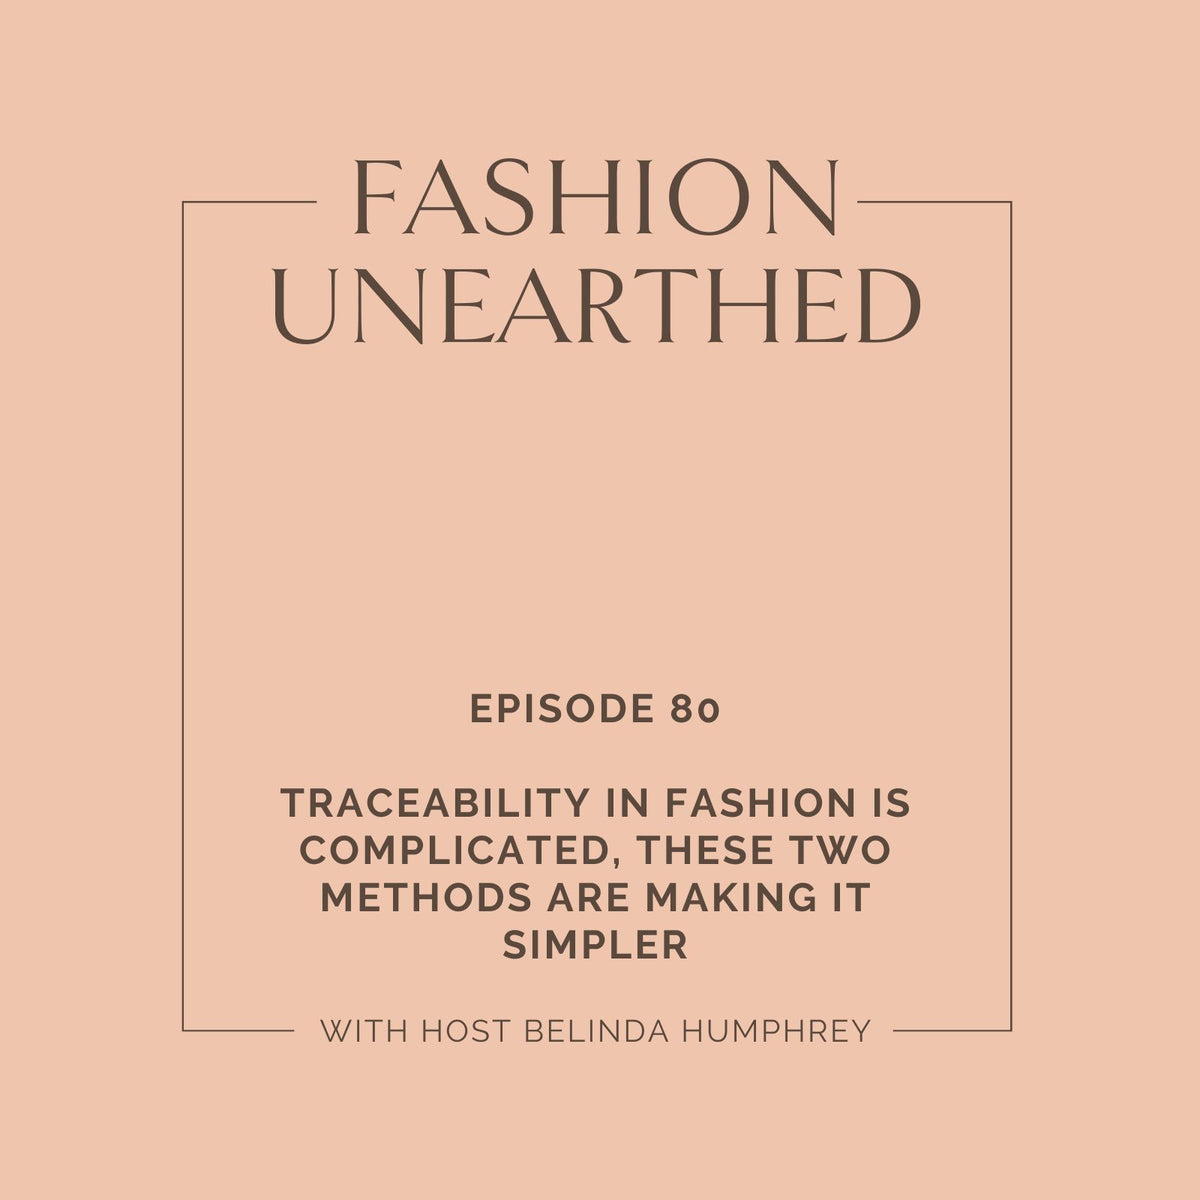 Episode 80: Traceability in fashion is complicated, here are the two methods making it simpler